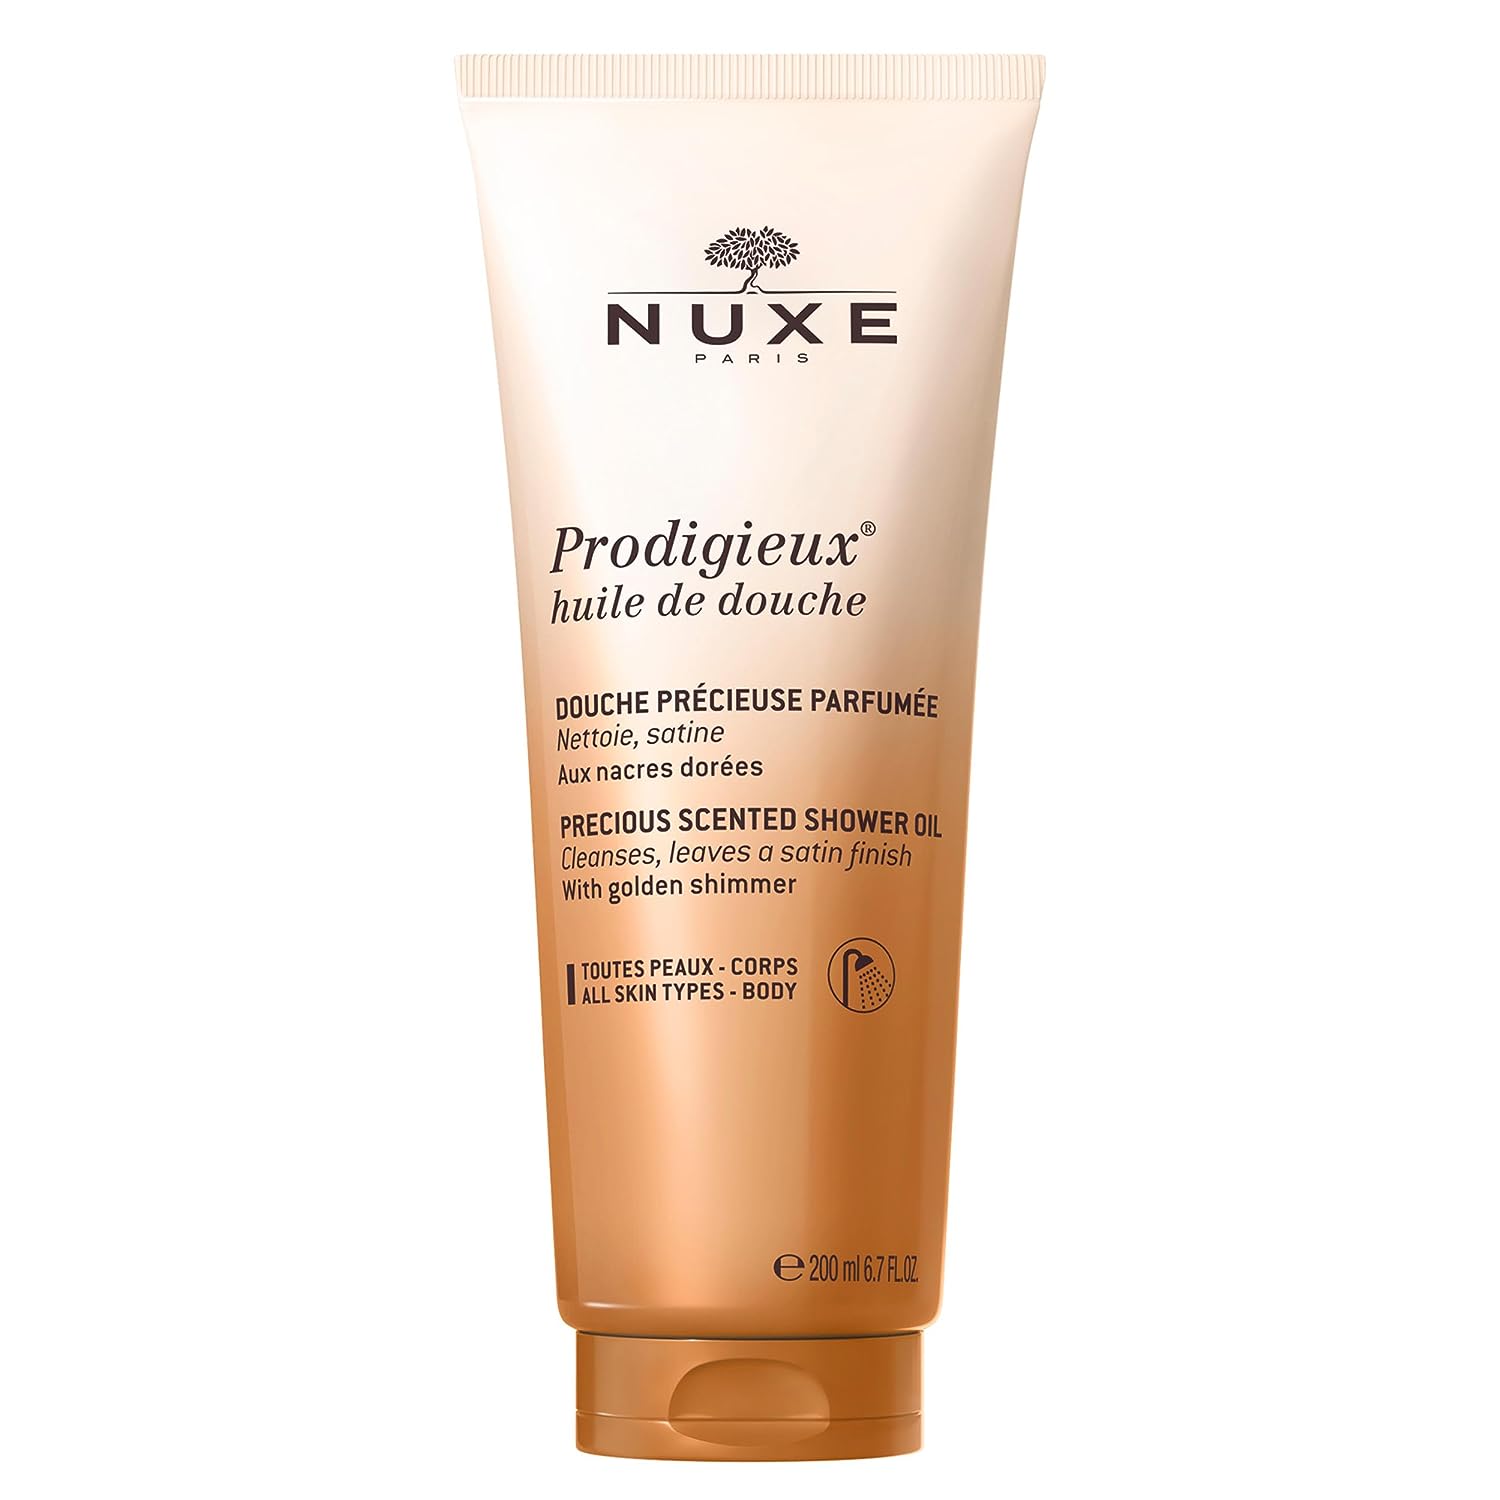 NUXE Prodigieux Vegan Body Wash | Luxurious, Scented & Moisturizing Body Cleanser Made in France, 6.7